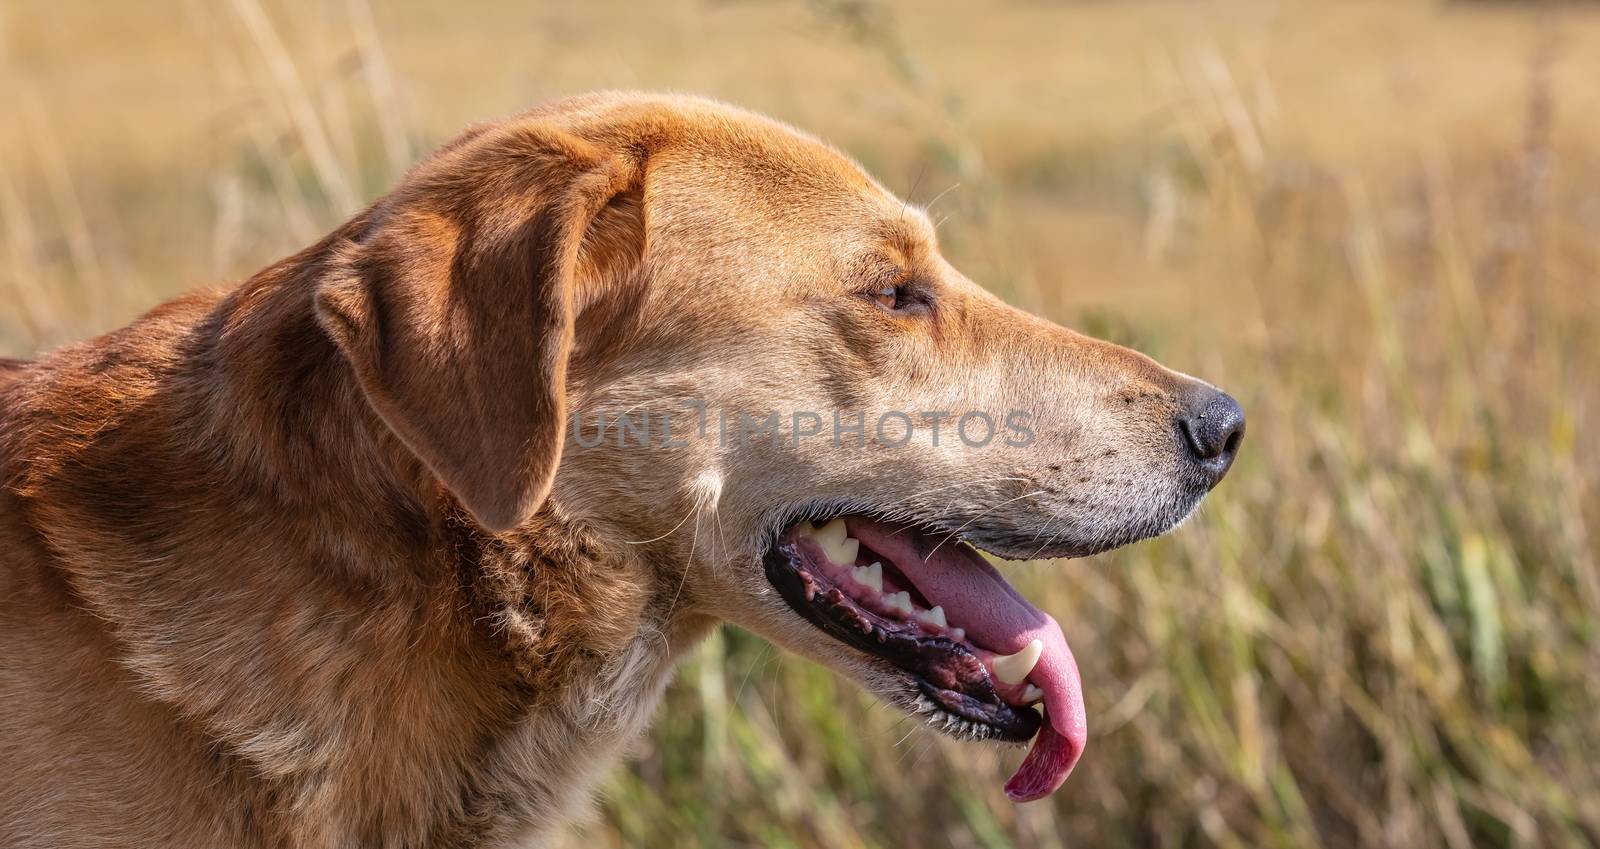 A close up shot of a brown hound hunting on a meadow background in the country. Dog looking curiously in the distance. Blurred background.